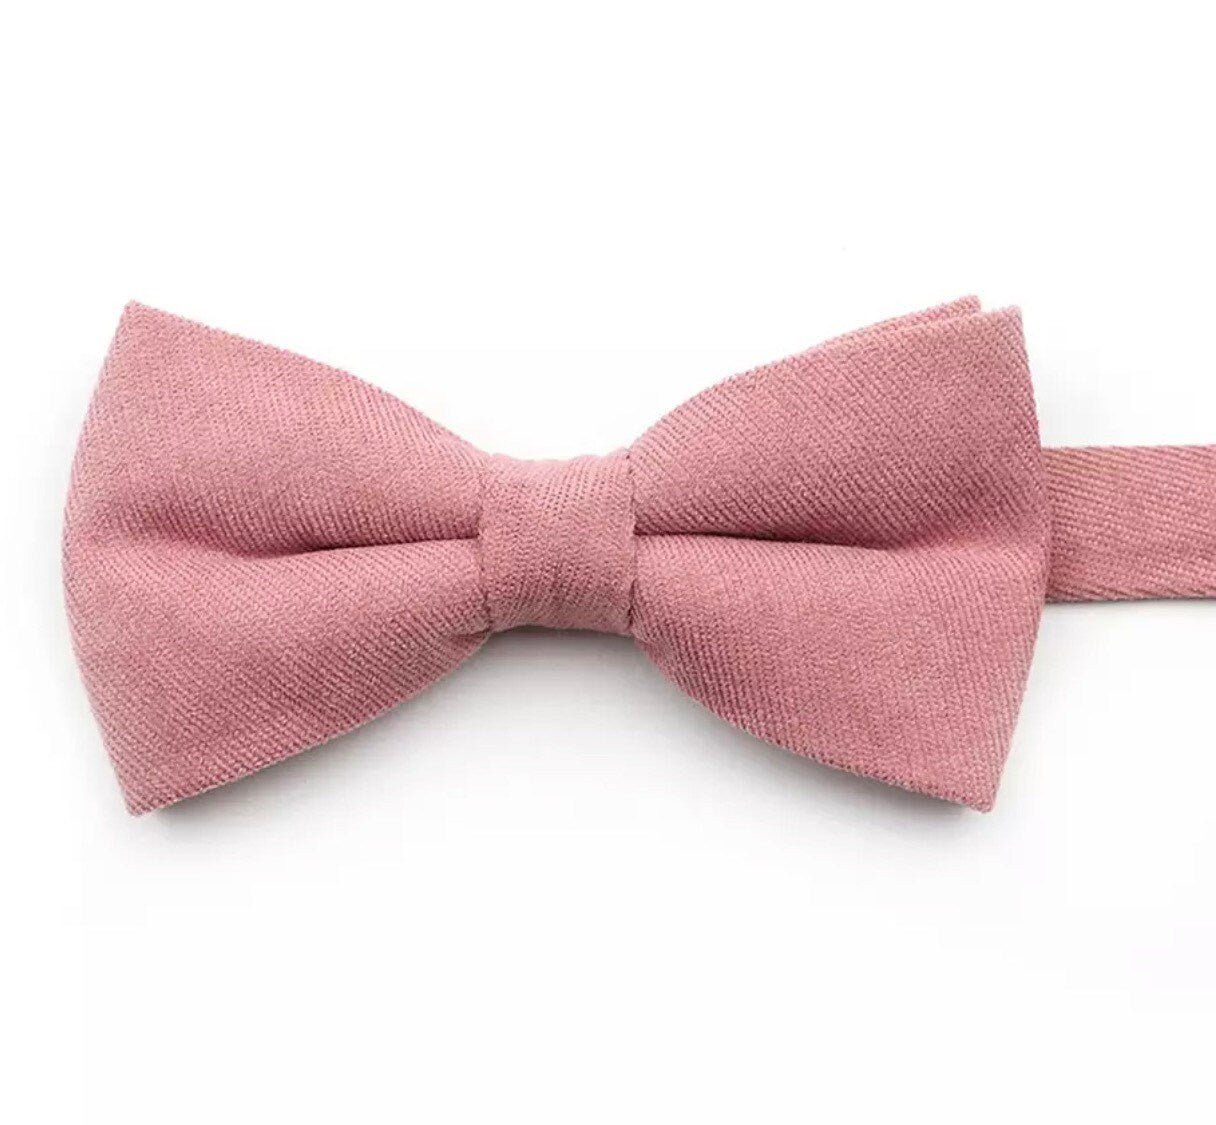 ROSÉ adult Floral Pre-Tied Bow Tie-Pink Bow tie Strap is 32CM Long (10-18 Inches) Adult bow tie with adjustable strap (Average men neck size is 15) Color: Pink Great for: Groom Groomsmen Wedding Shoots Formal Prom Fancy Parties Gifts and presents-Mytieshop